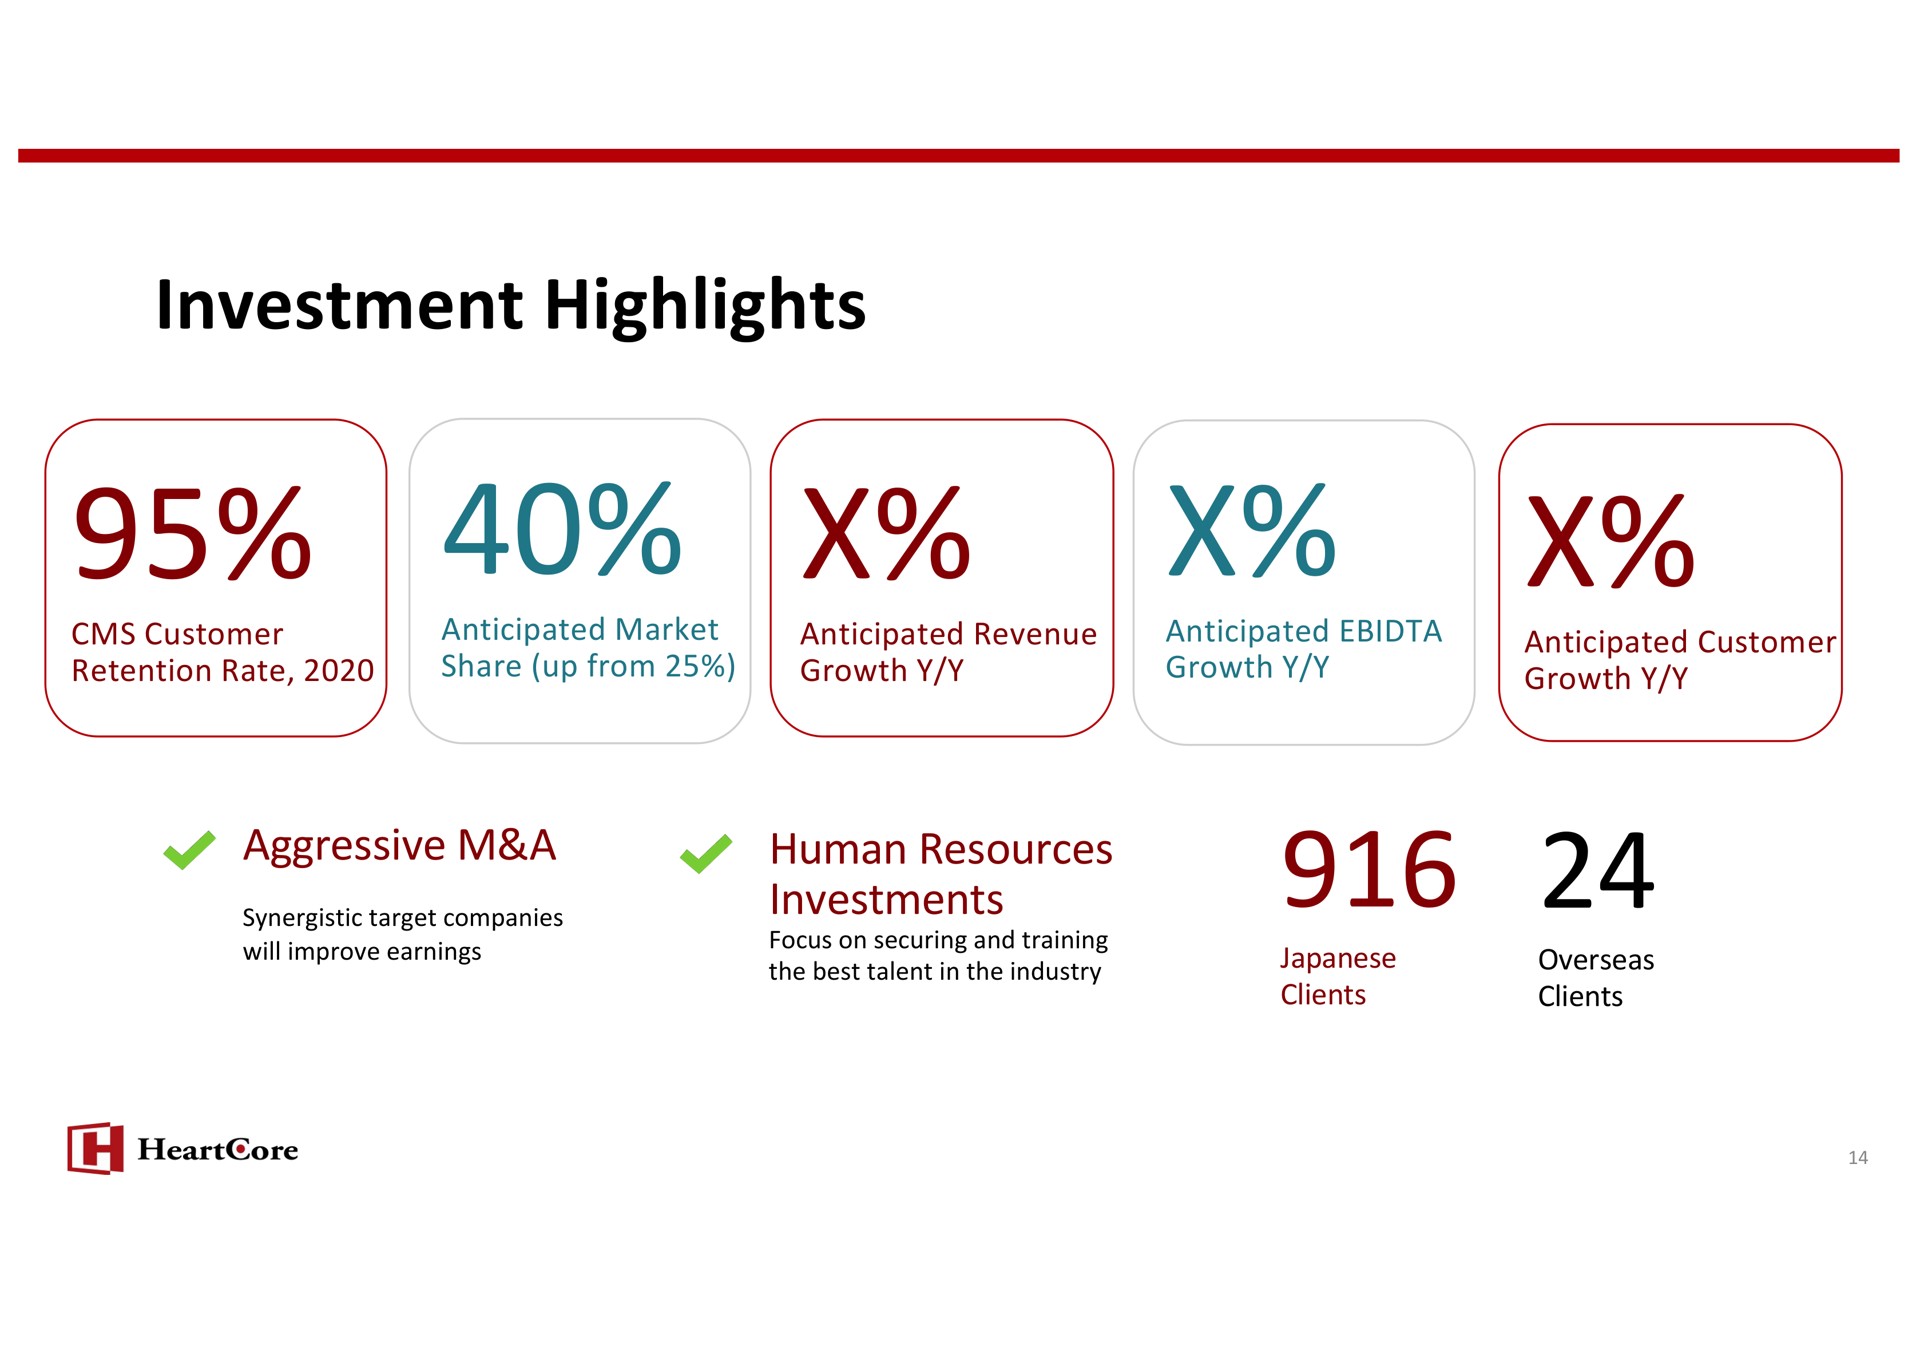 investment highlights aggressive a human resources | HeartCore Enterprises